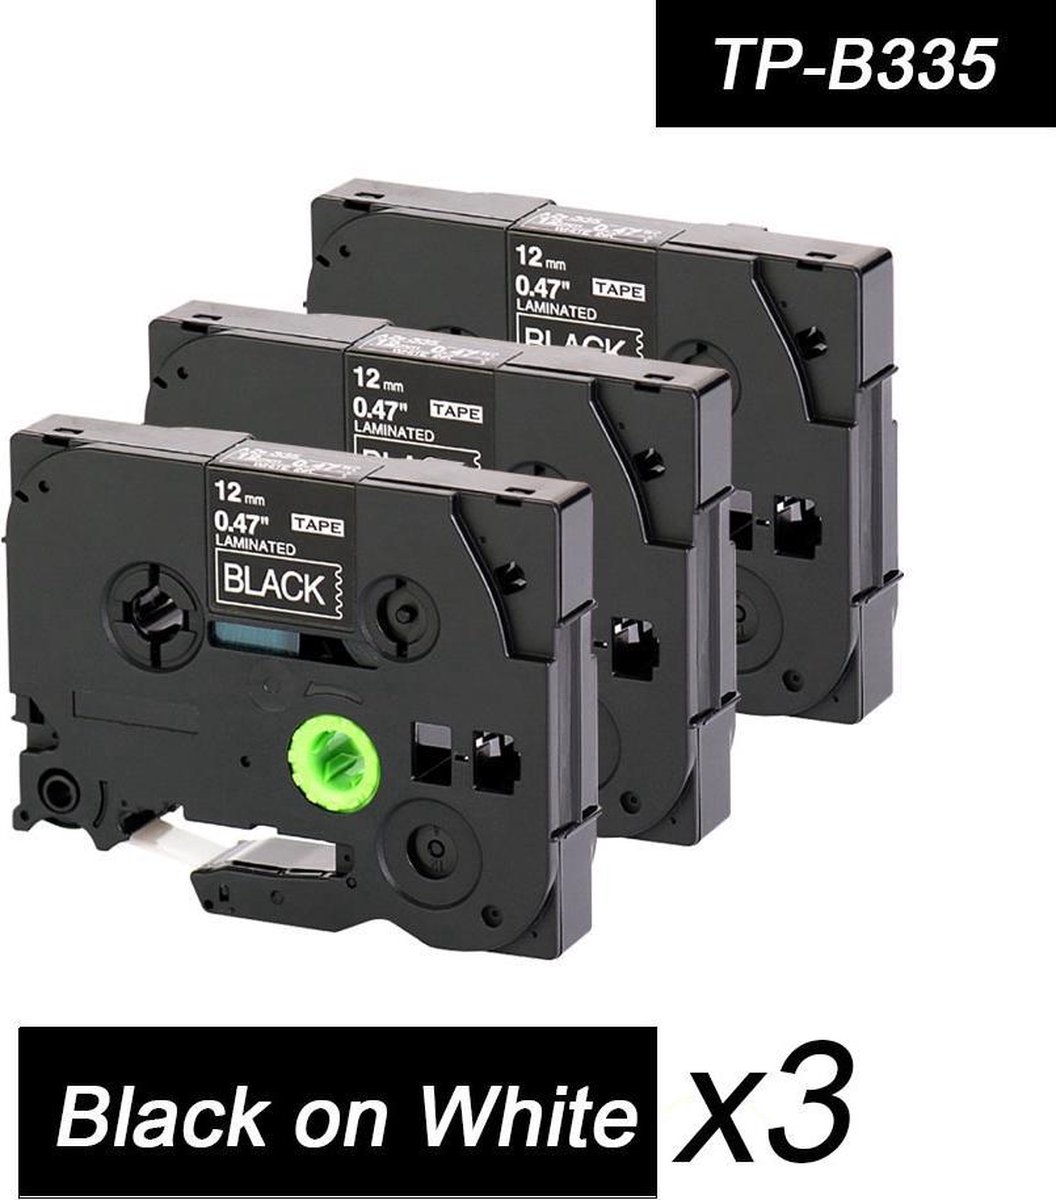 3x Brother Tze-335 TZ-335 Compatible voor Brother P-touch Label Tapes - Wit op Zwart - 12mm